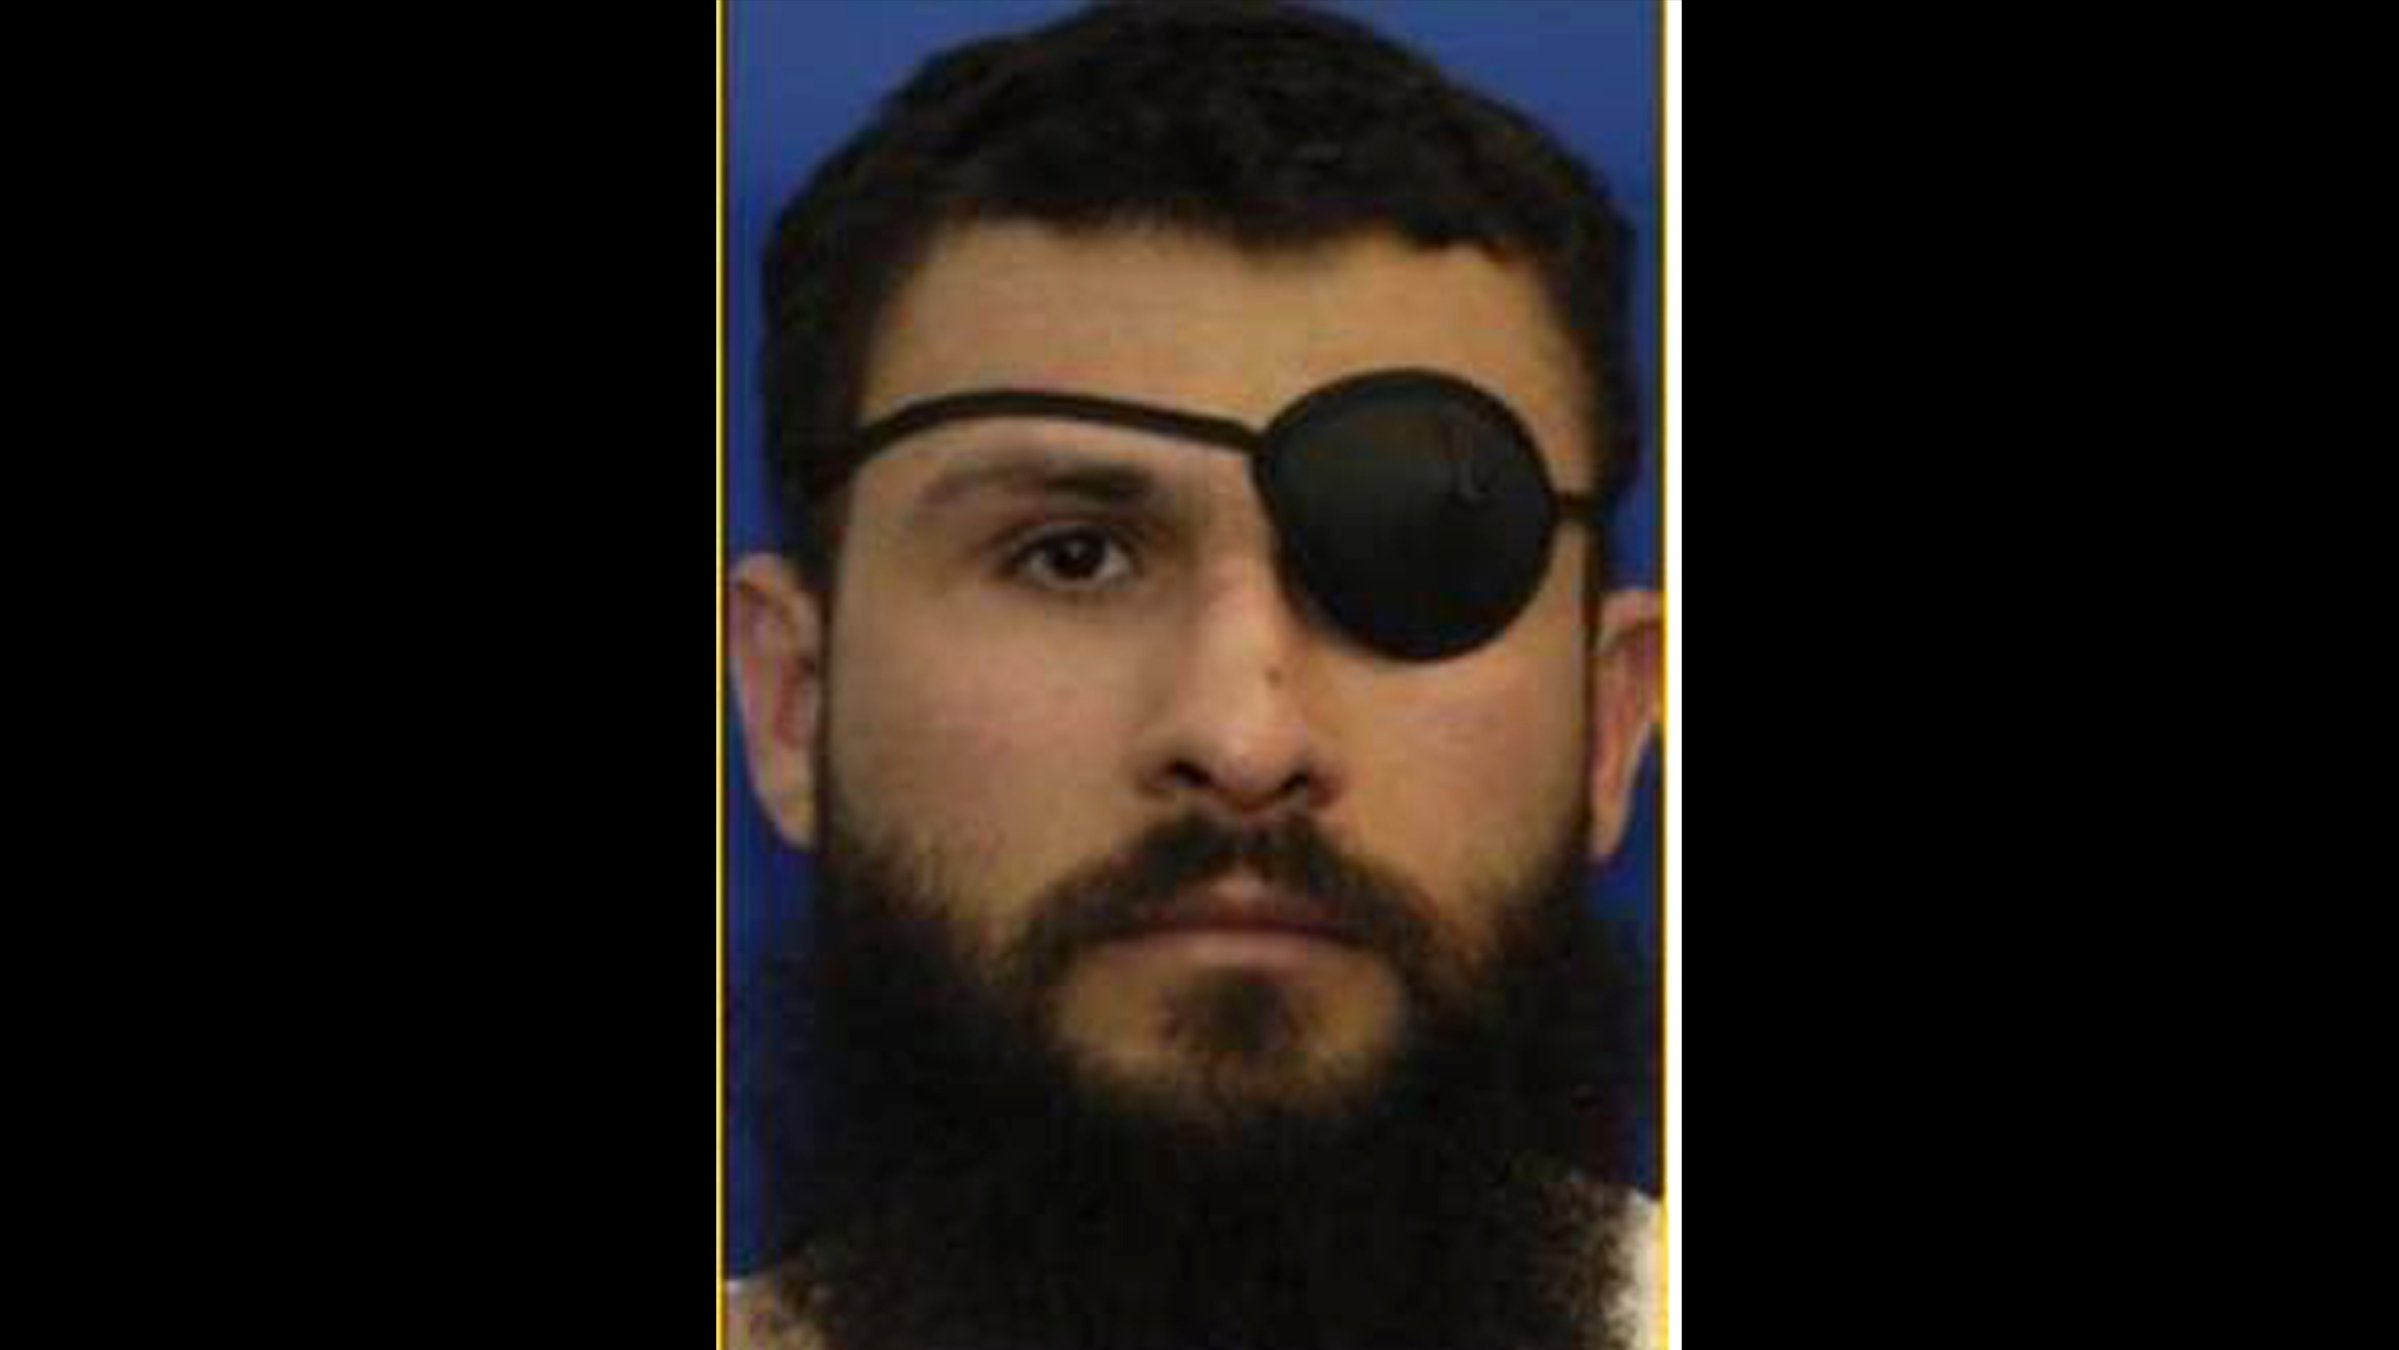 Abu Zubaydah is imprisoned at the Guantanamo Bay detention.